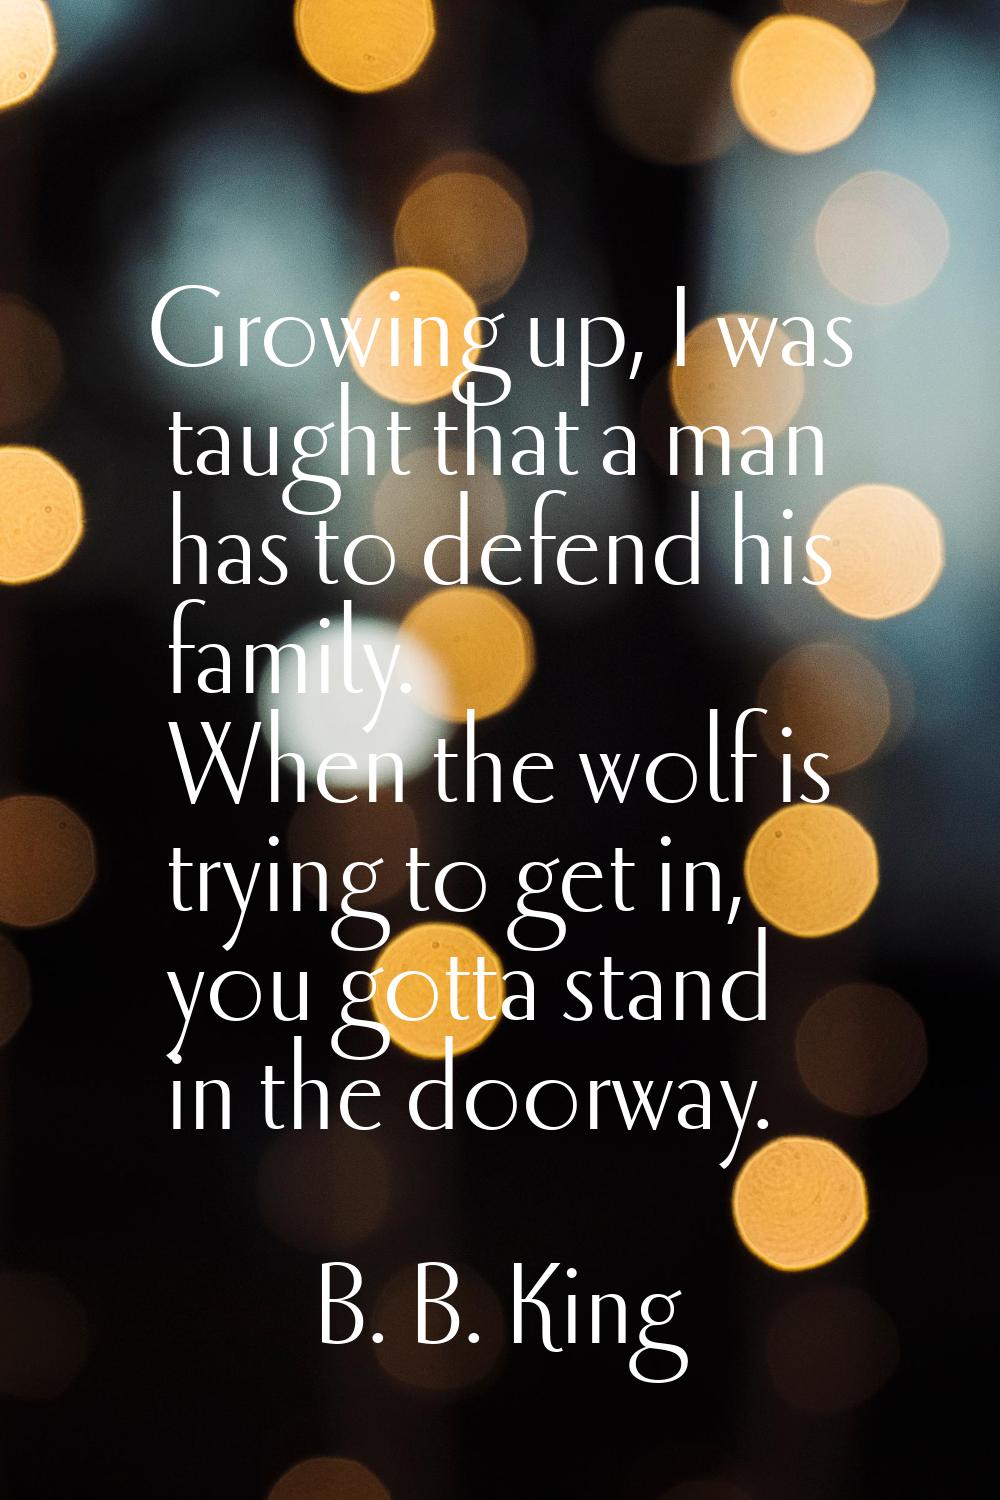 Growing up, I was taught that a man has to defend his family. When the wolf is trying to get in, yo